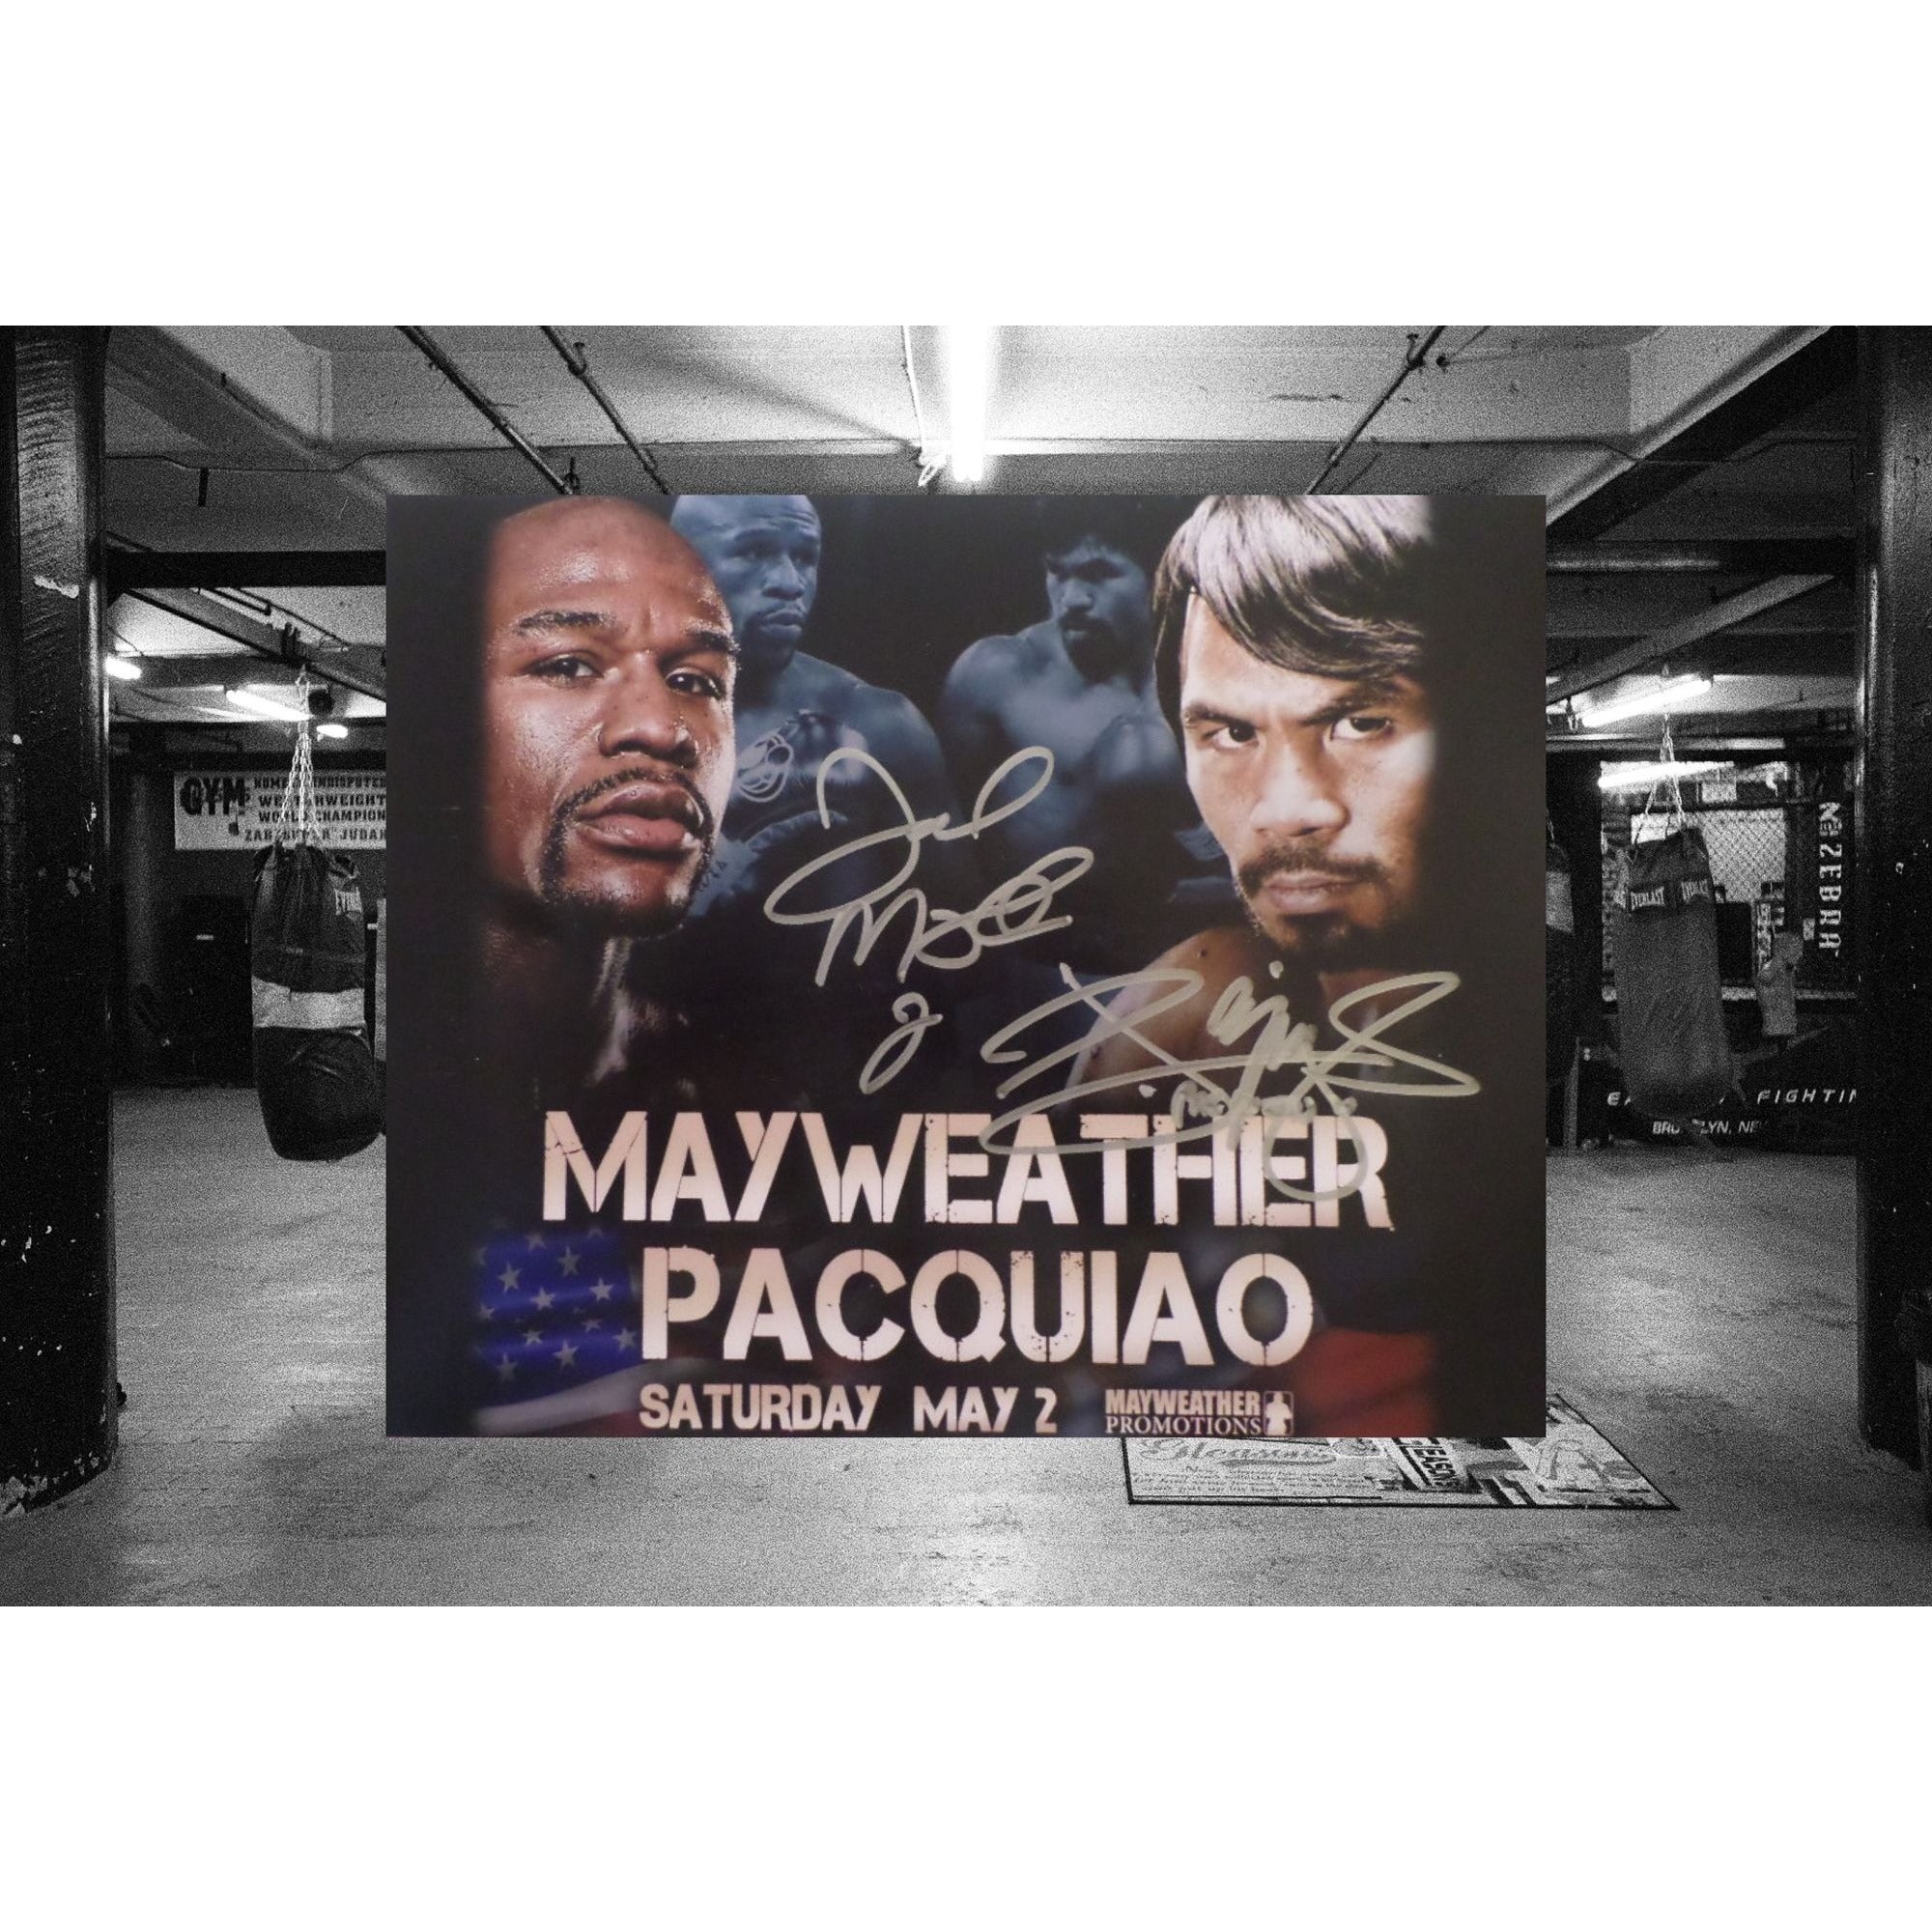 Floyd Mayweather Jr and Manny Pacquiao 8x10 signed photo